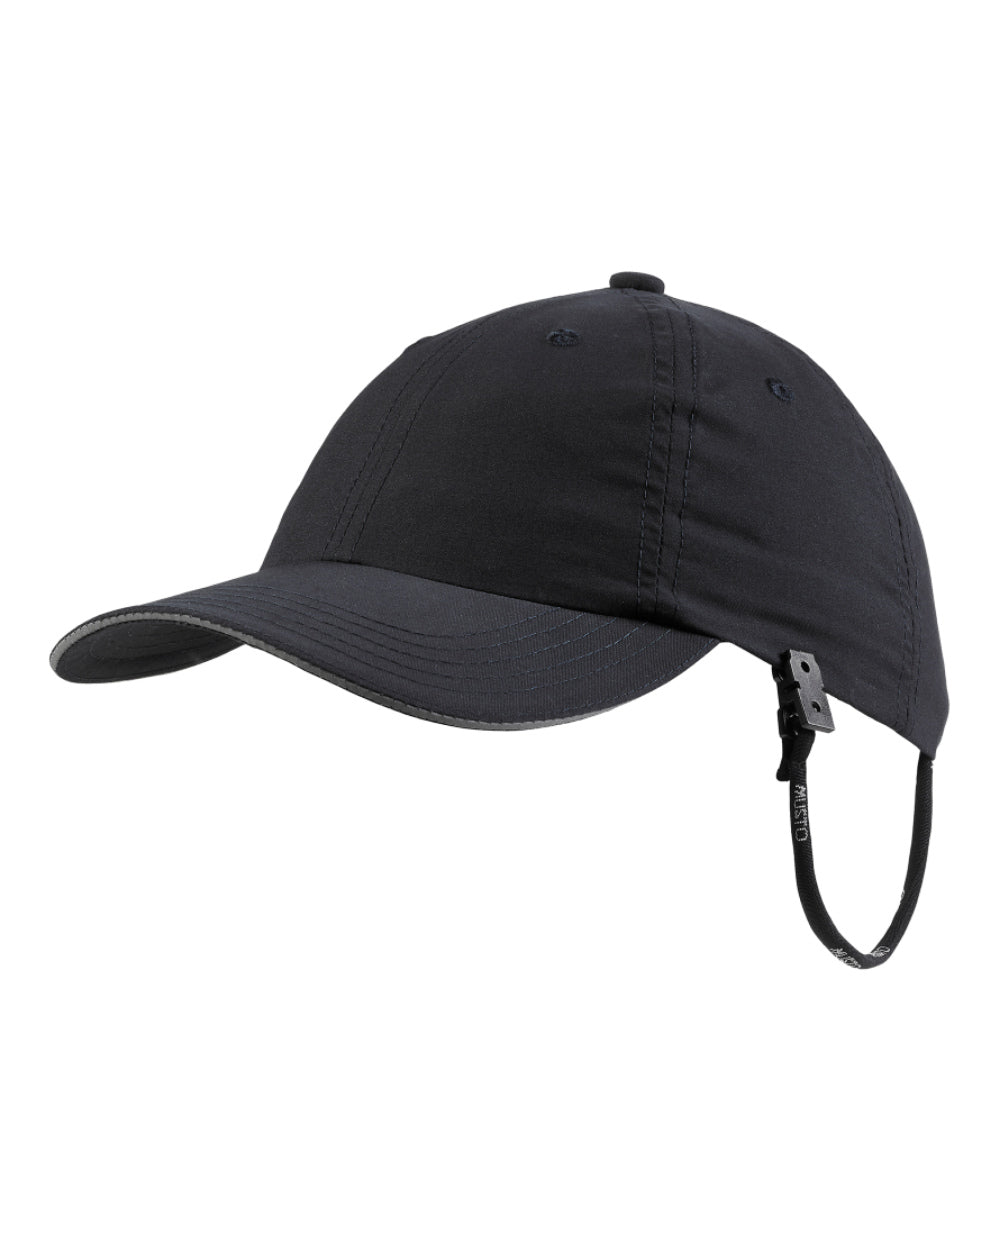 Black Coloured Musto Corporate Fast Dry Cap On A White Background 